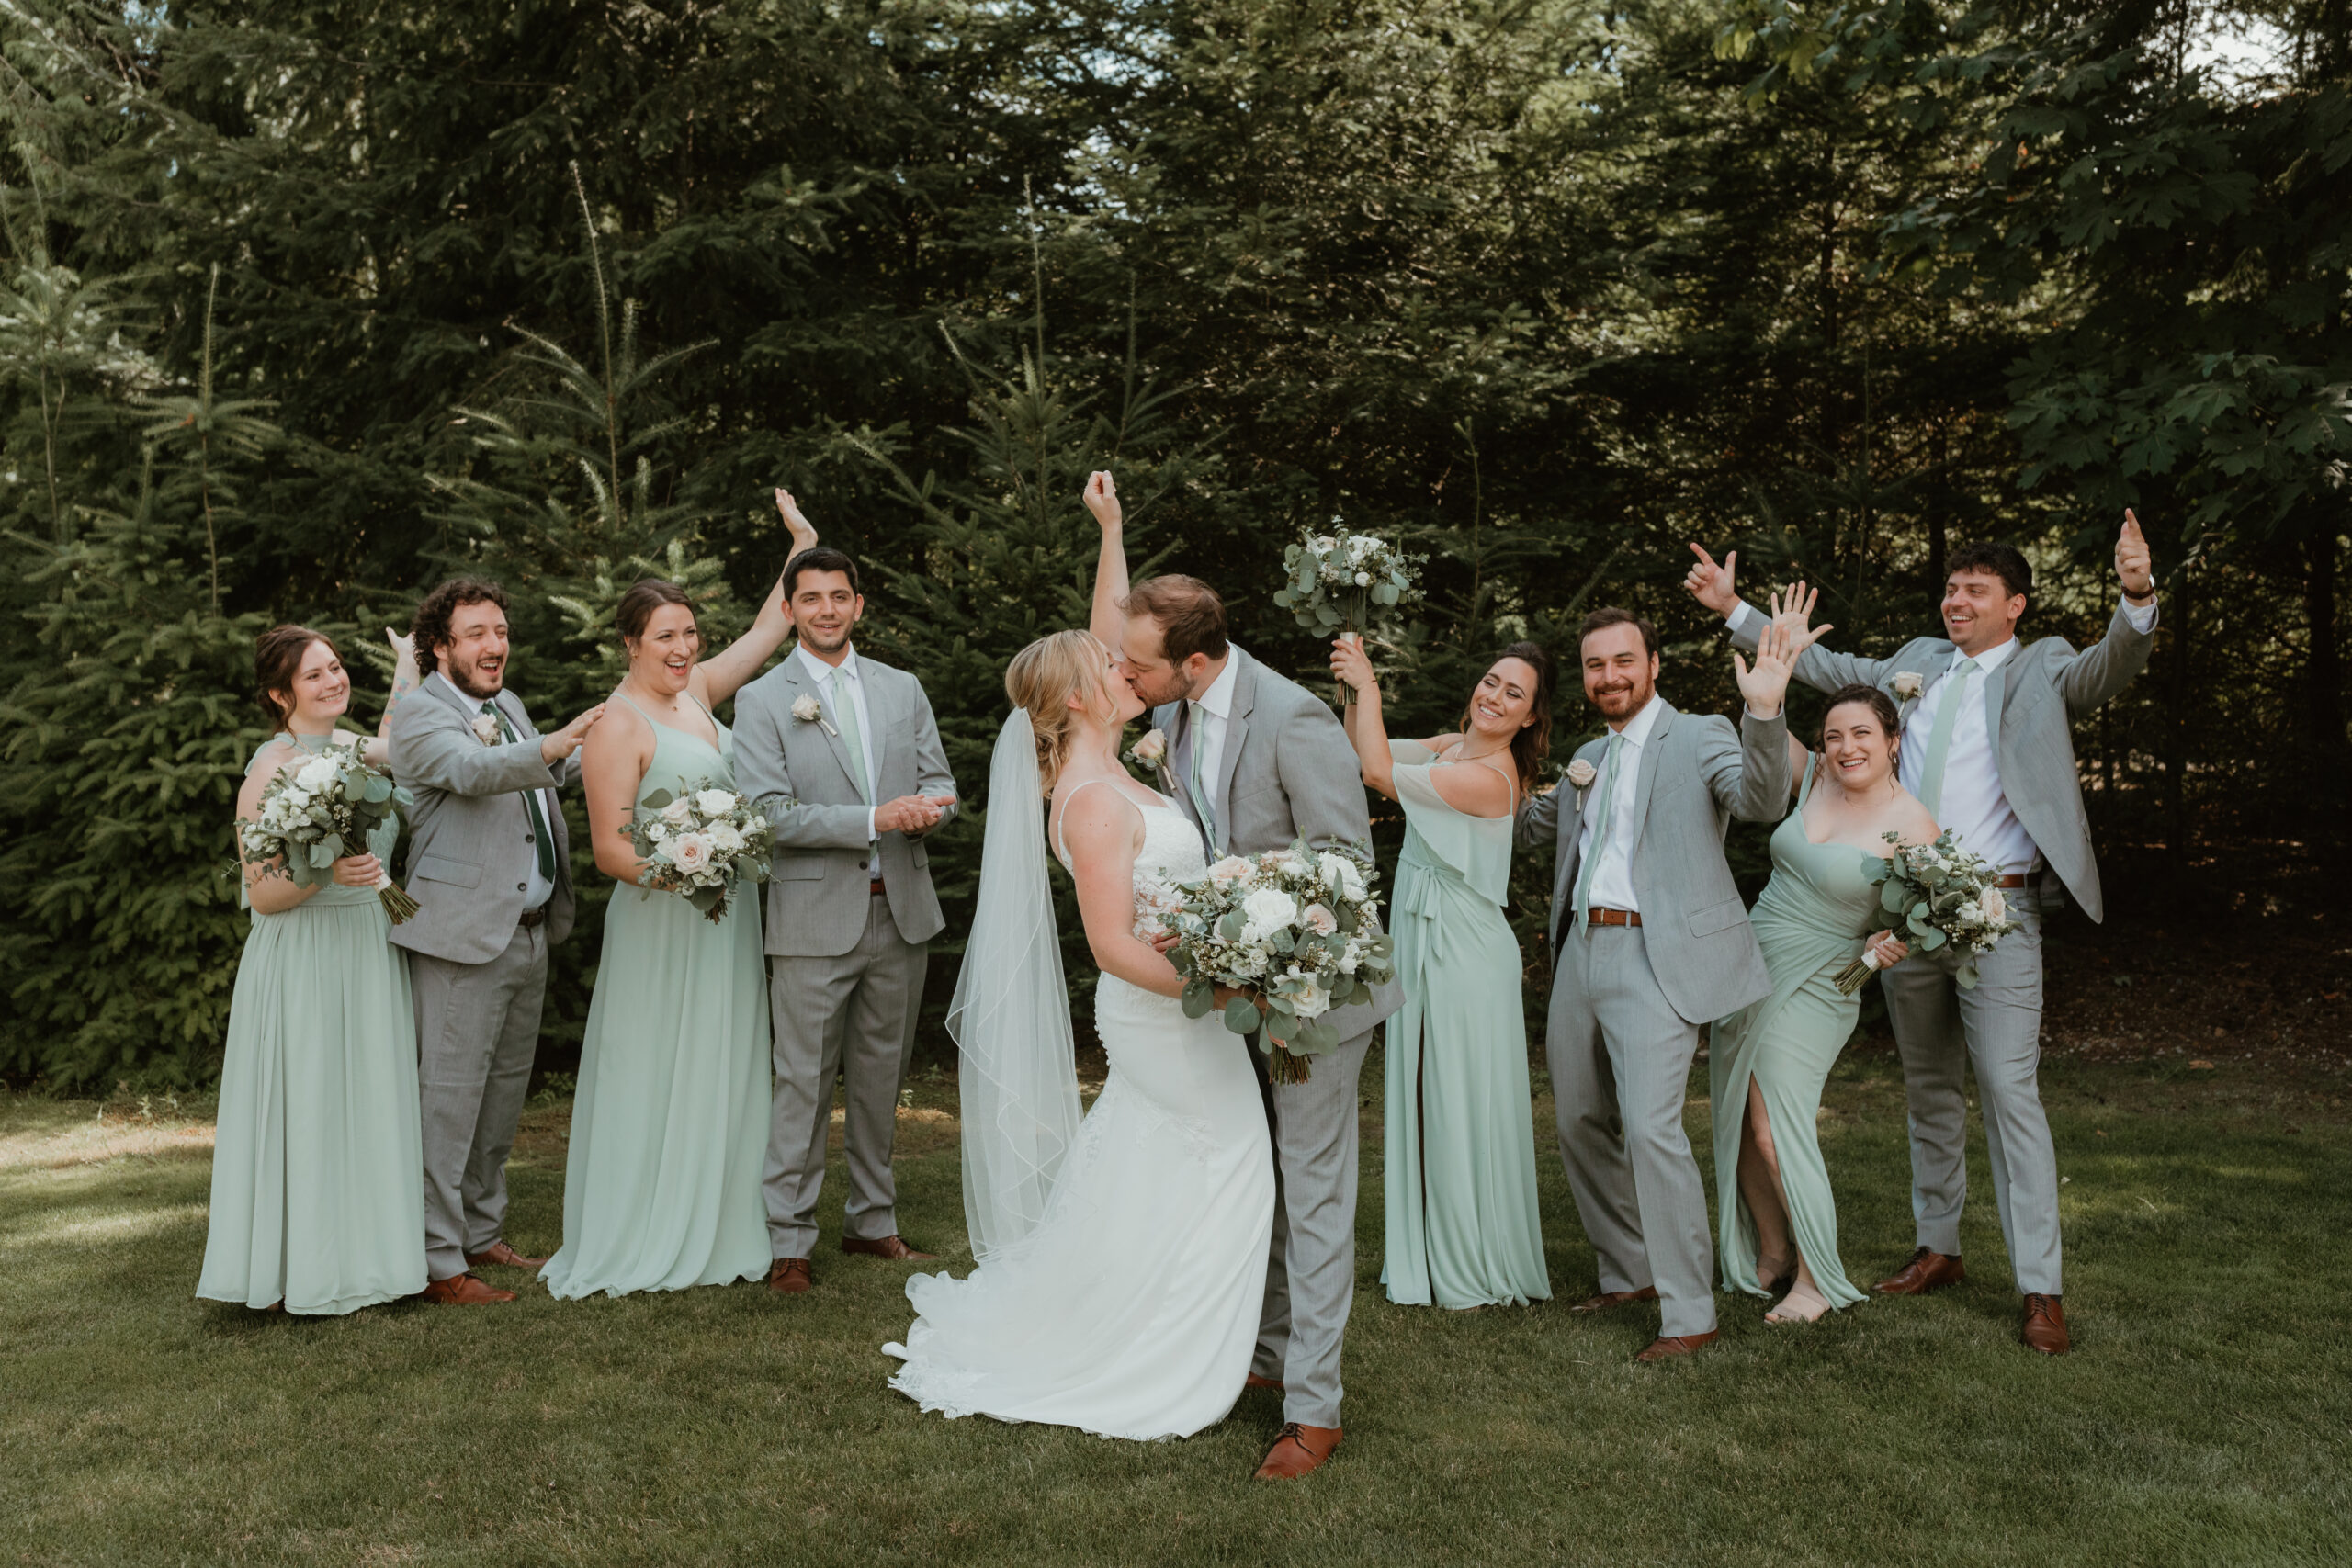 bride and groom kissing with their bridal party celebrating around them